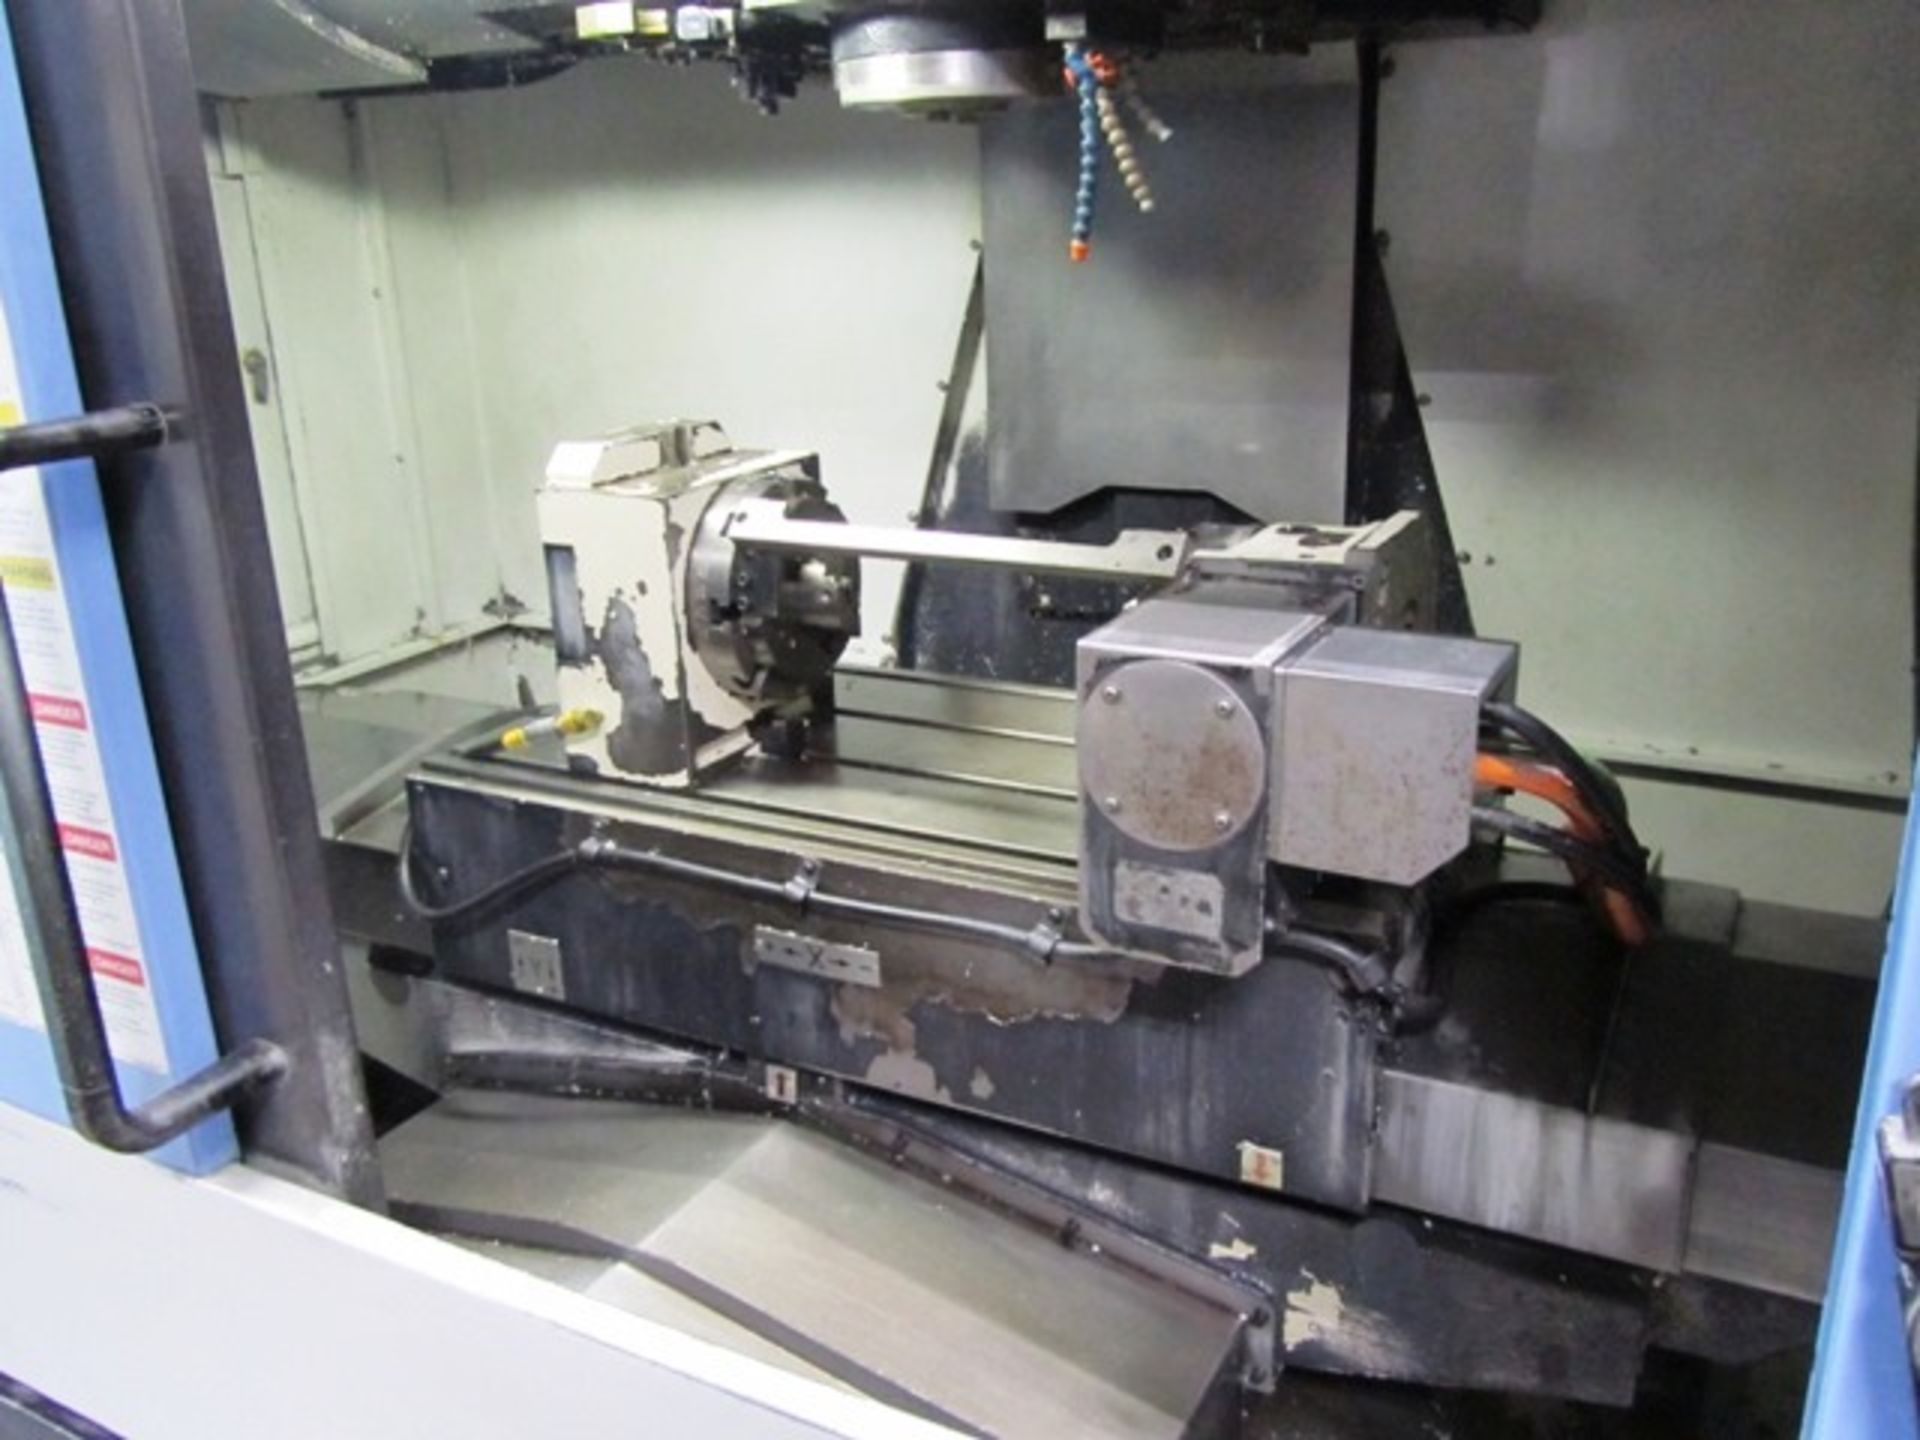 Doosan DNM 400 4-Axis CNC Vertical Machining Center with 6'' & 8'' Tsudakoma 4th Axis Rotary Tables, - Image 4 of 4